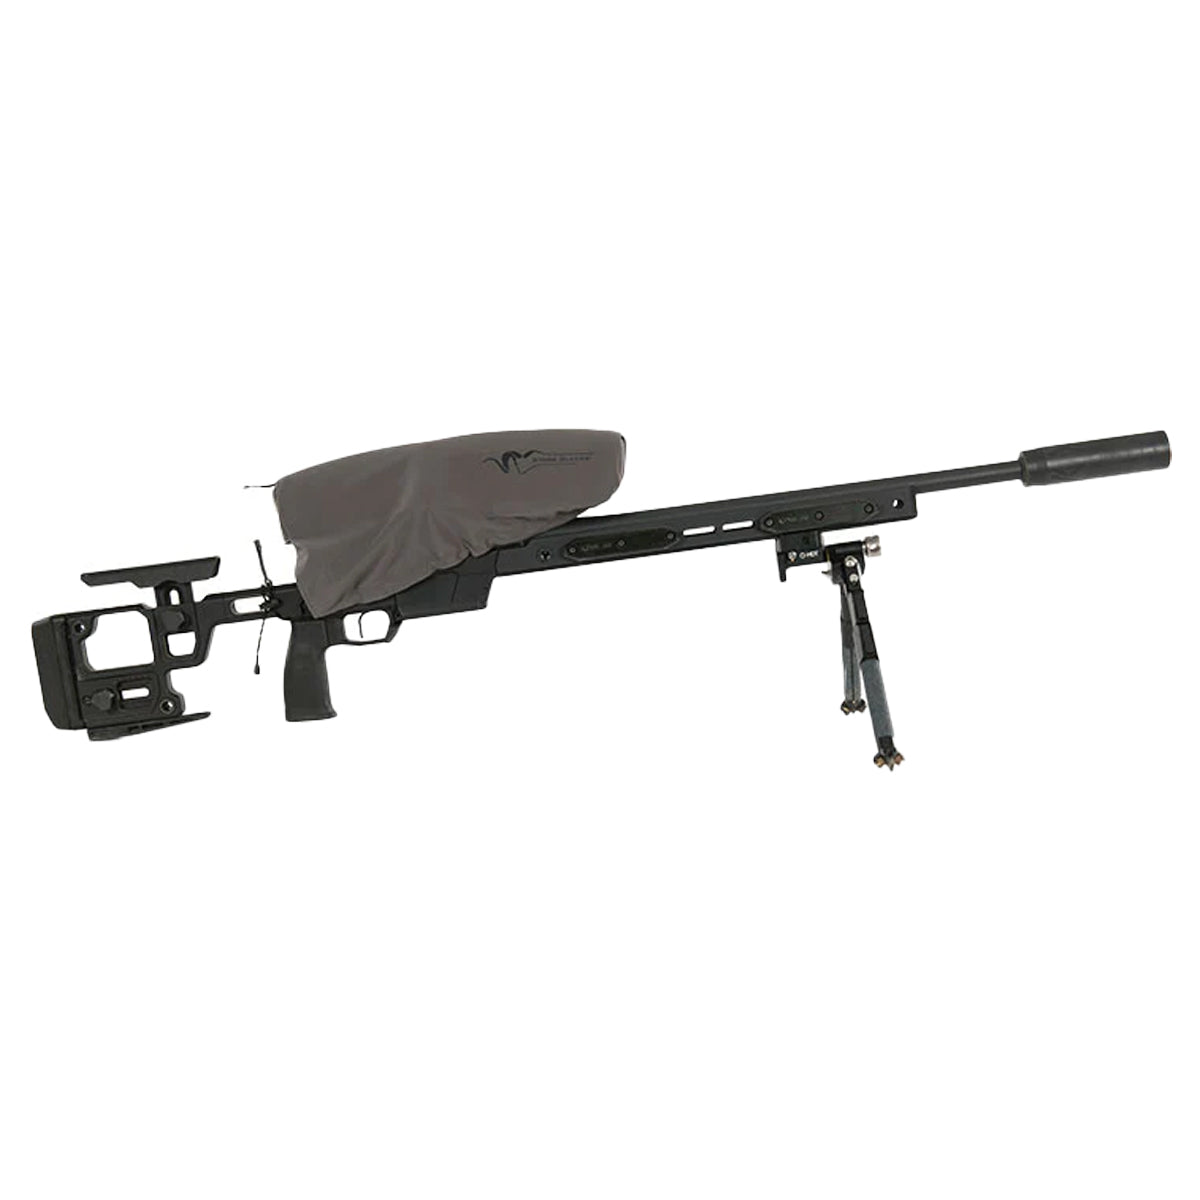 Stone Glacier Skyline Quick-Release Scope Cover in  by GOHUNT | Stone Glacier - GOHUNT Shop